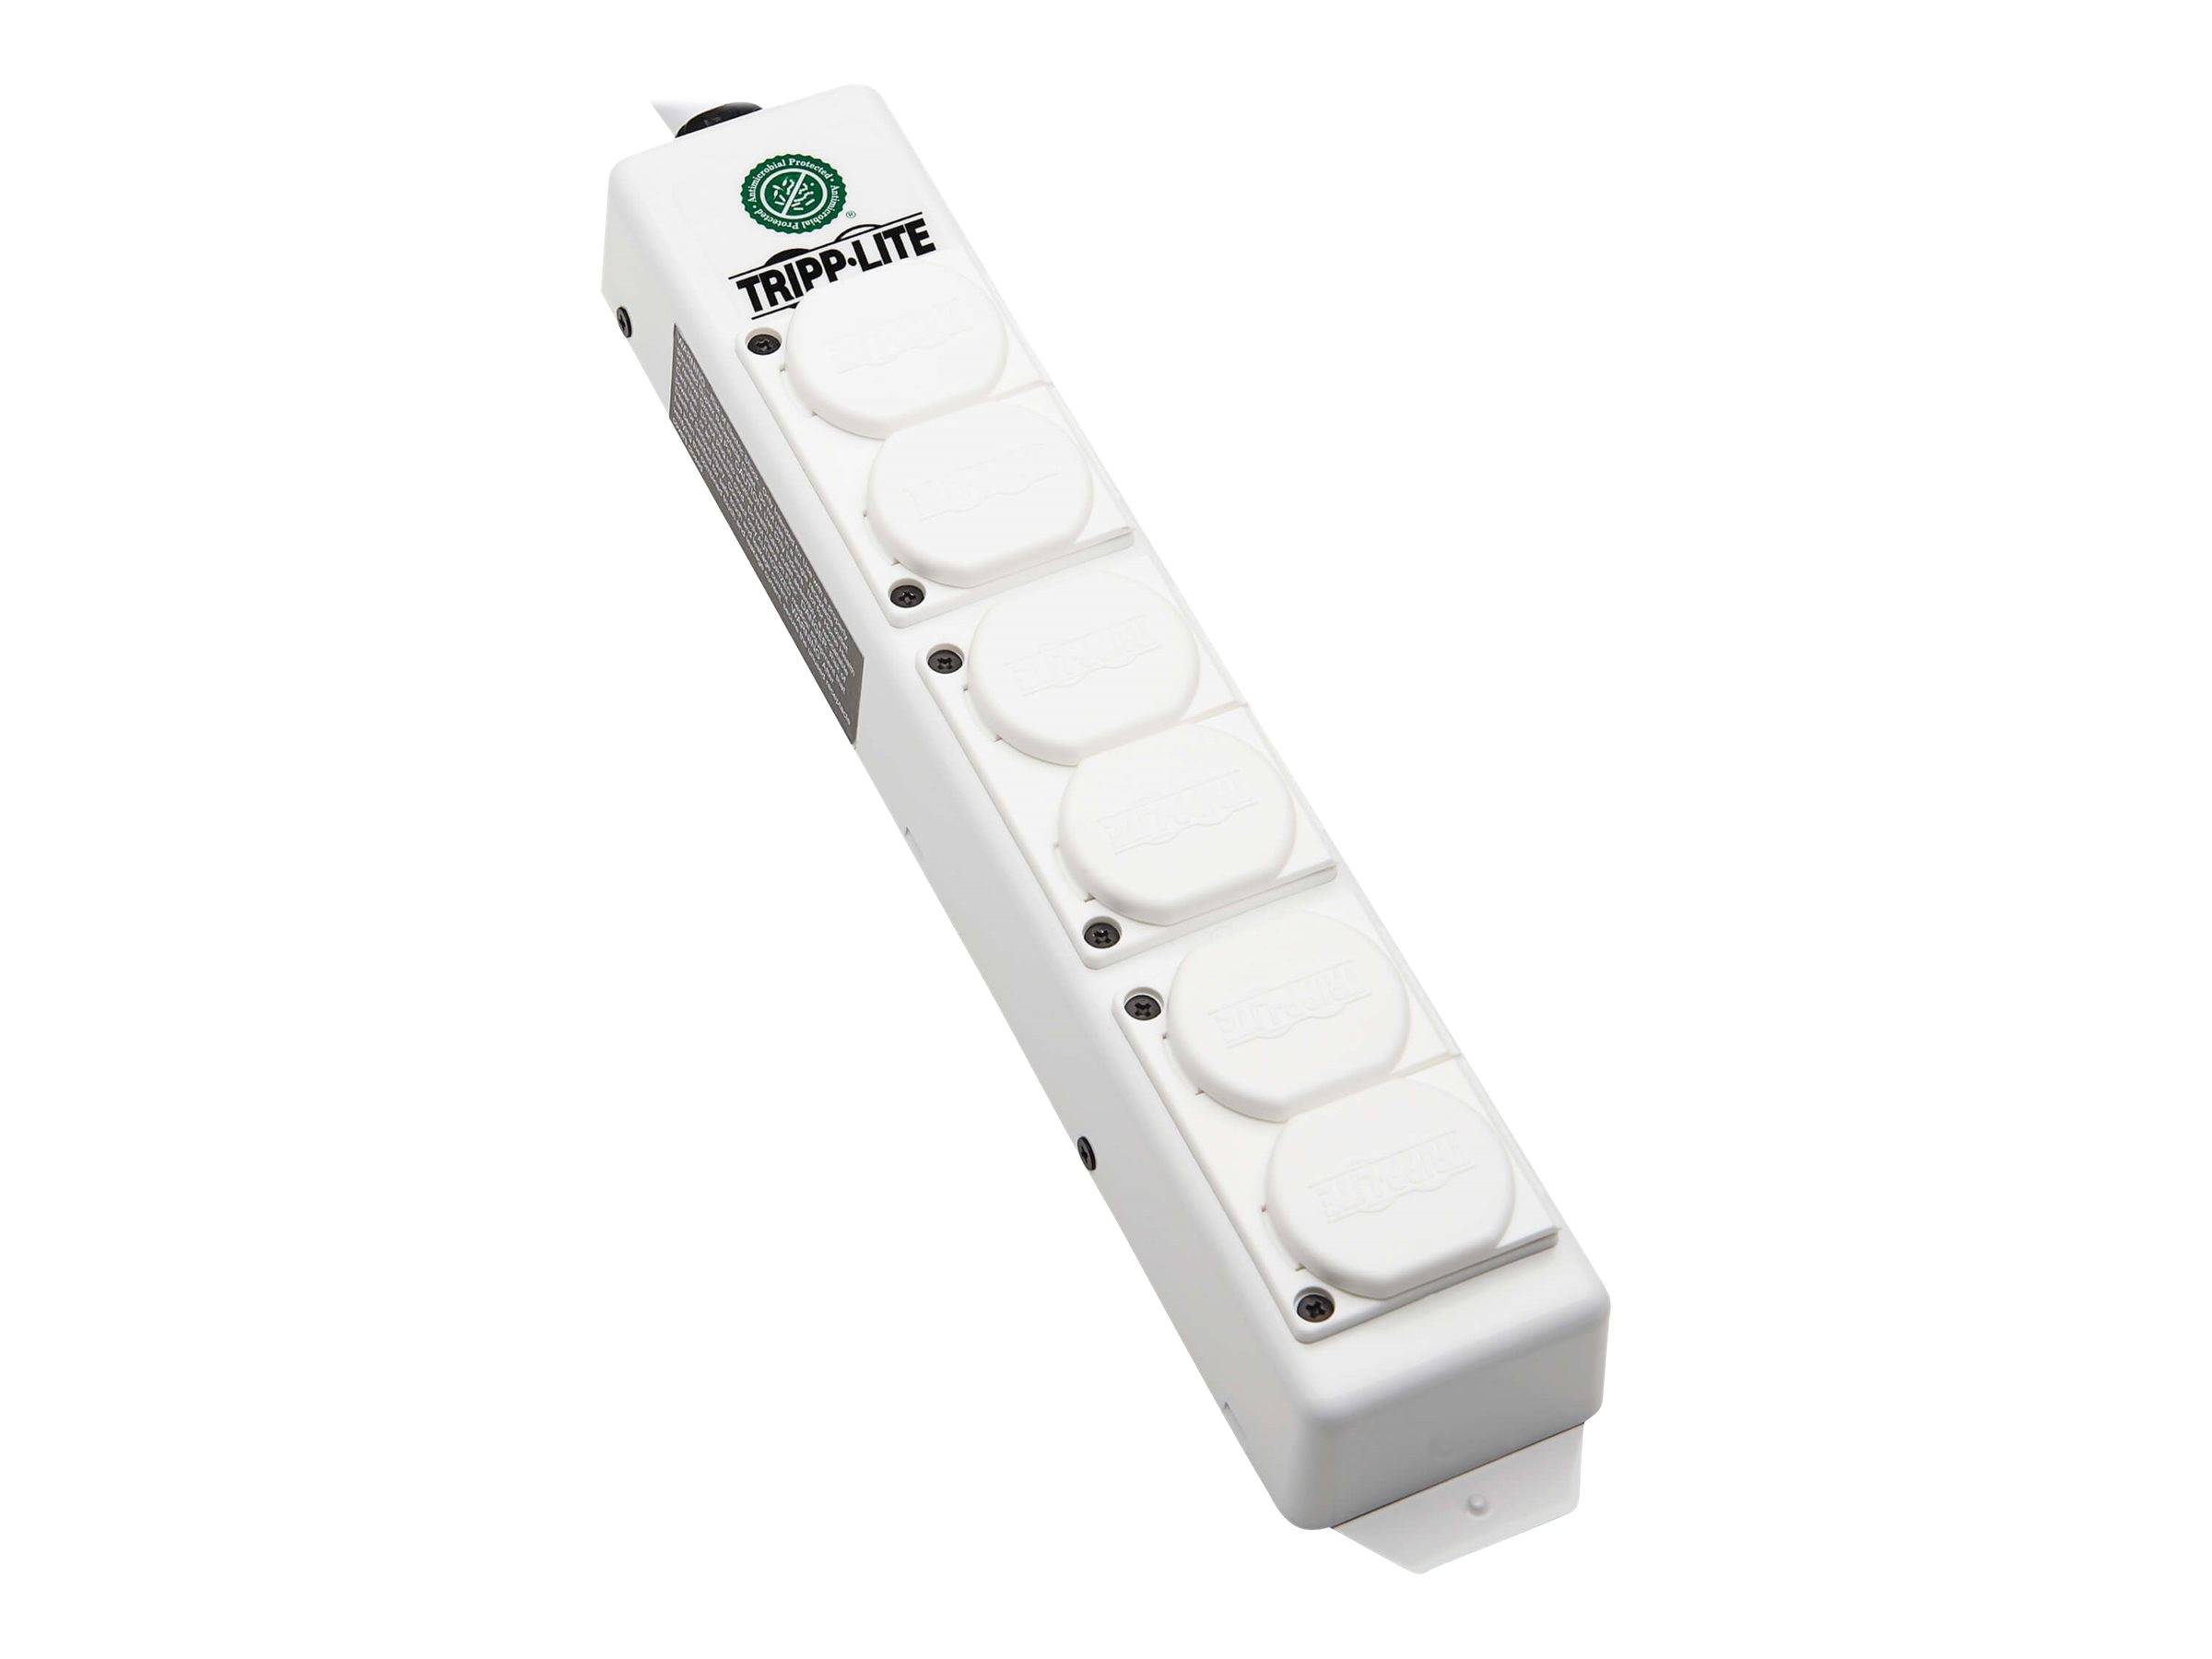 Tripp Lite Safe-IT UL 2930 Medical-Grade Power Strip for Patient Care Vicinity, 6 Hospital-Grade Outlets,...